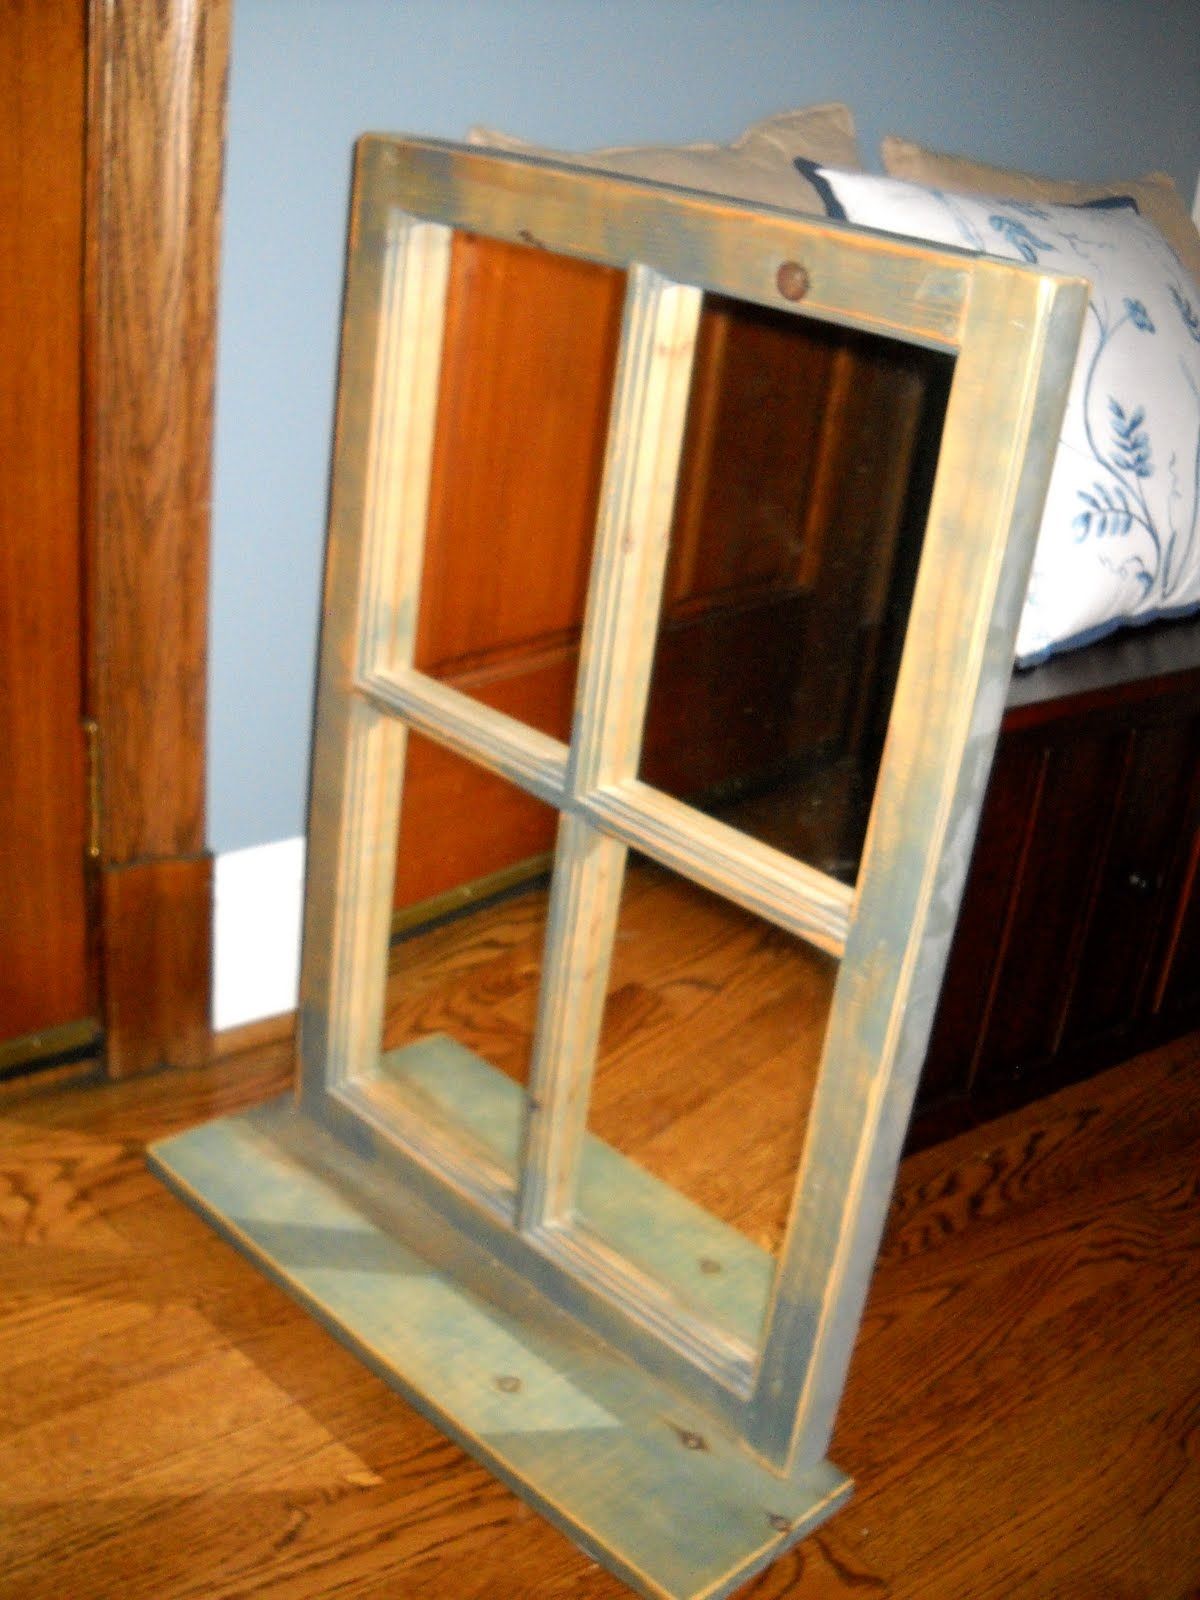 Window Pane Mirrors All About House Design Antique Window Pane Throughout Window Mirrors For Sale (View 12 of 15)